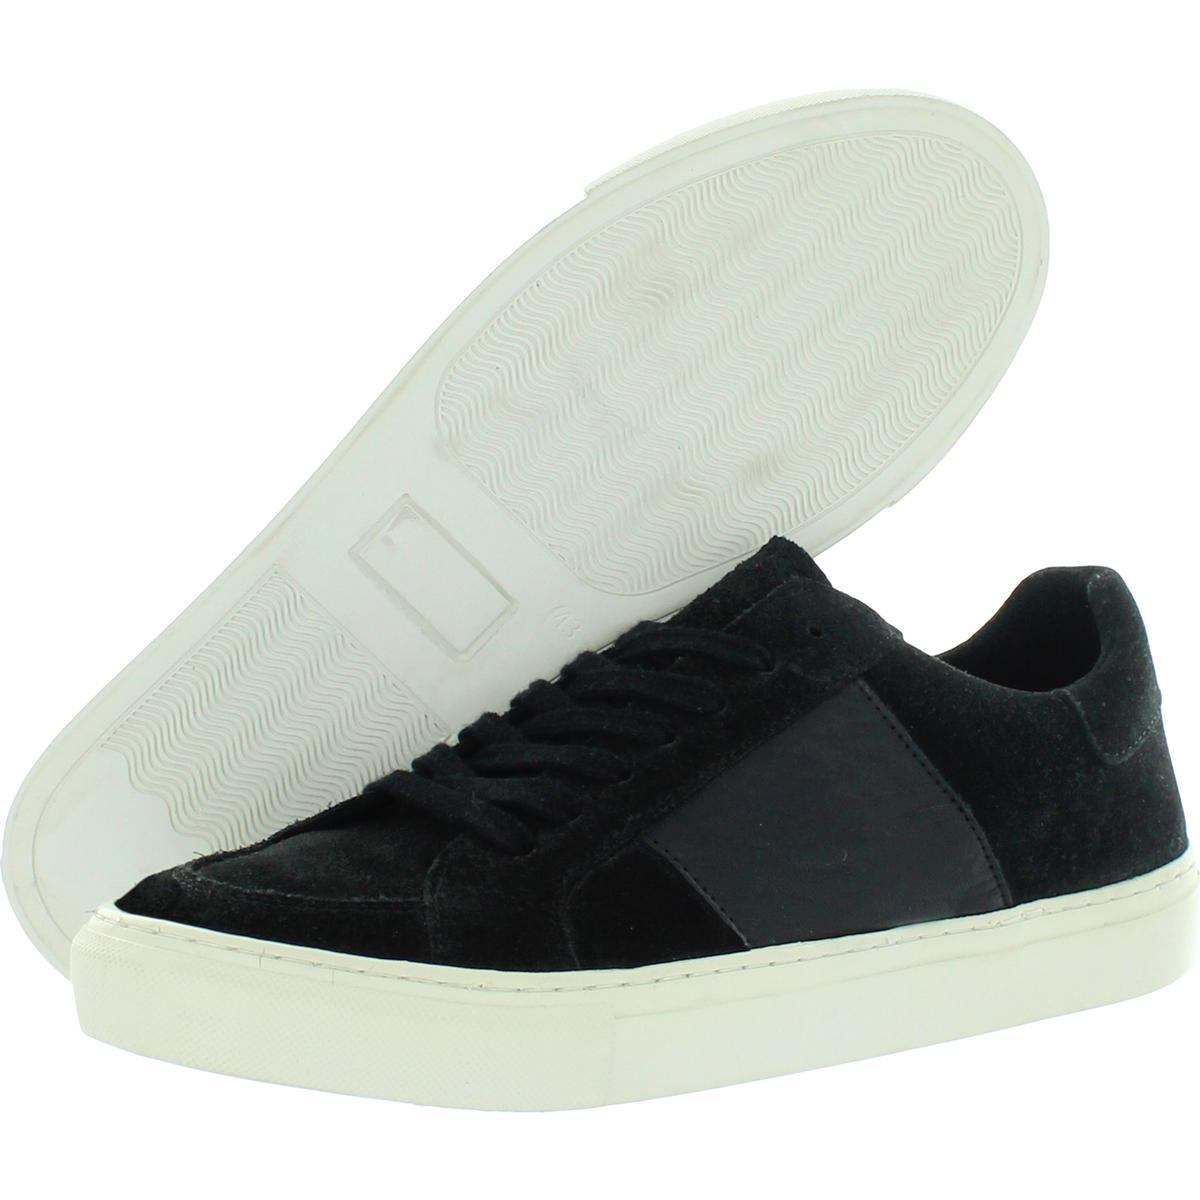 French Connection Mens Lars Suede Fitness Sneakers Trainers Shoes BHFO ...